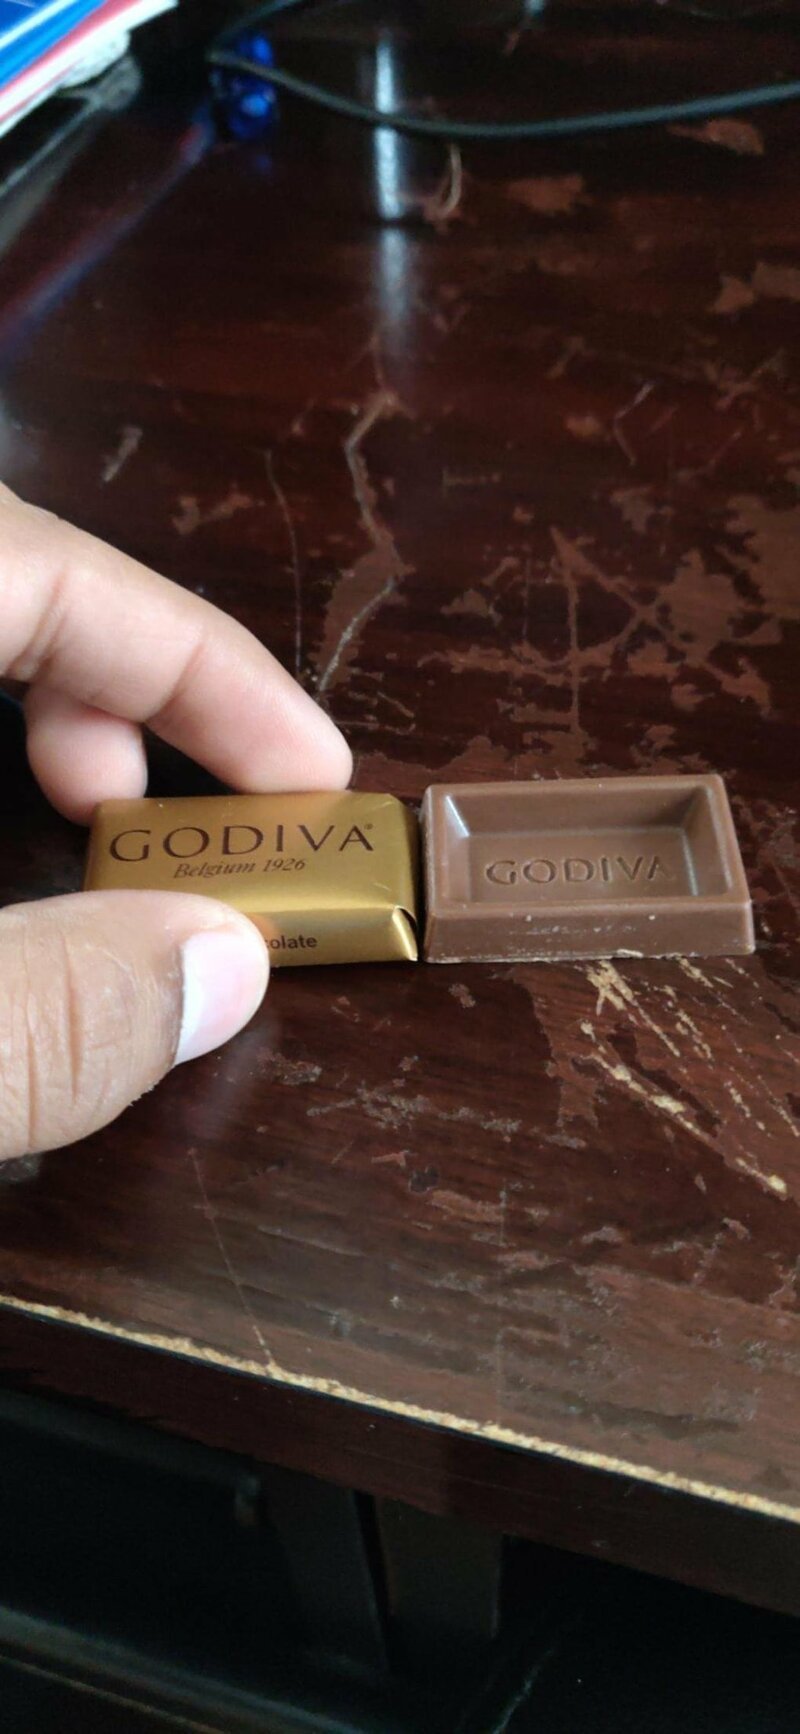 deceptive products and packaging -  material - Godiva Belgium 1926 olate Godiva